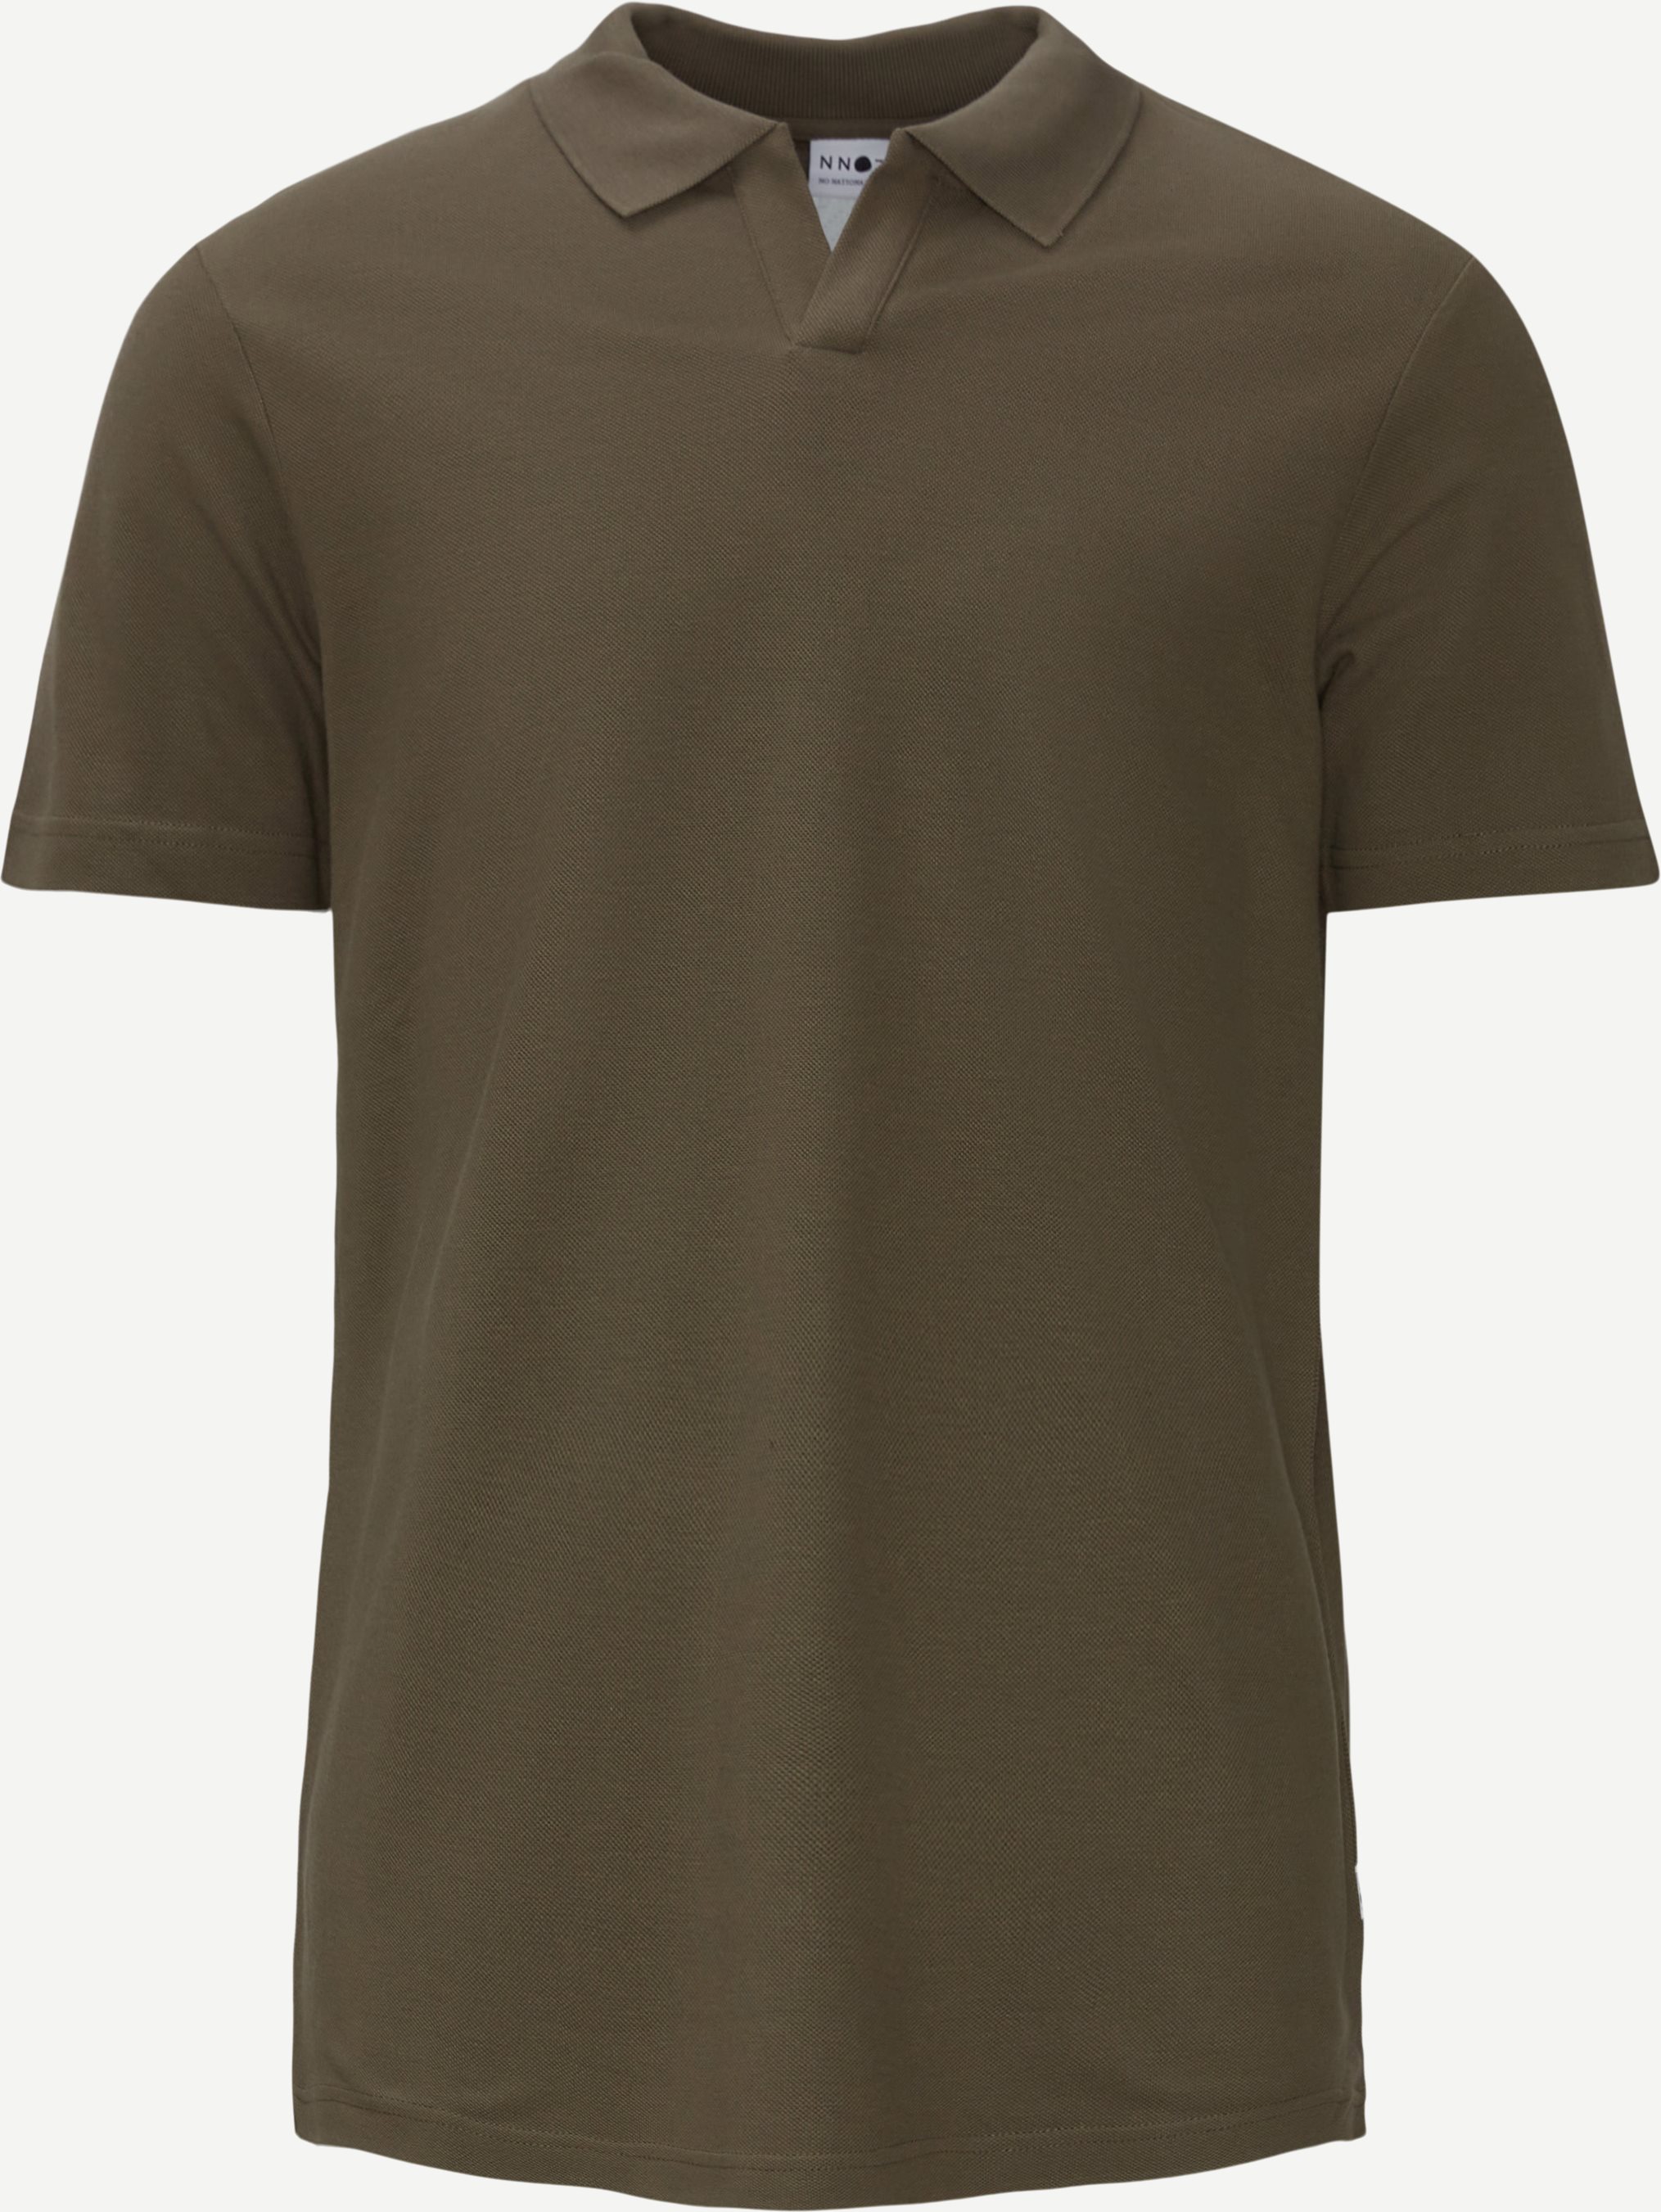 3463 Paul Polo - T-shirts - Regular fit - Sand